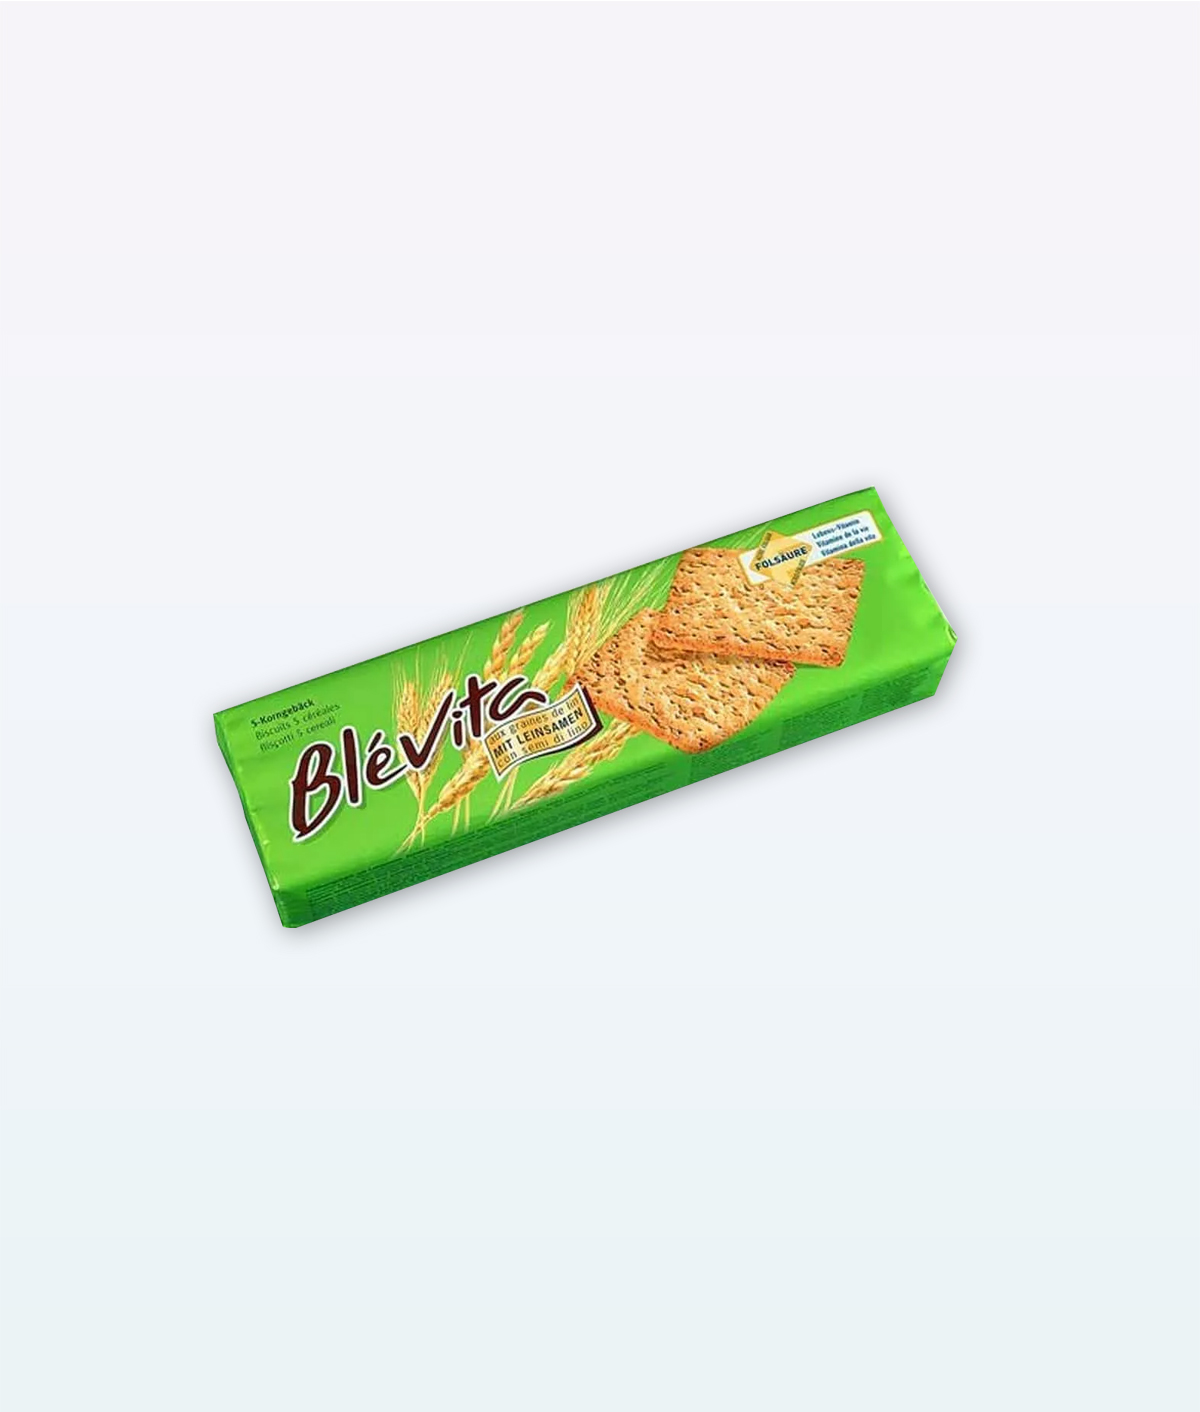 Blevita Biscuit Five Grains with Flax Seed2